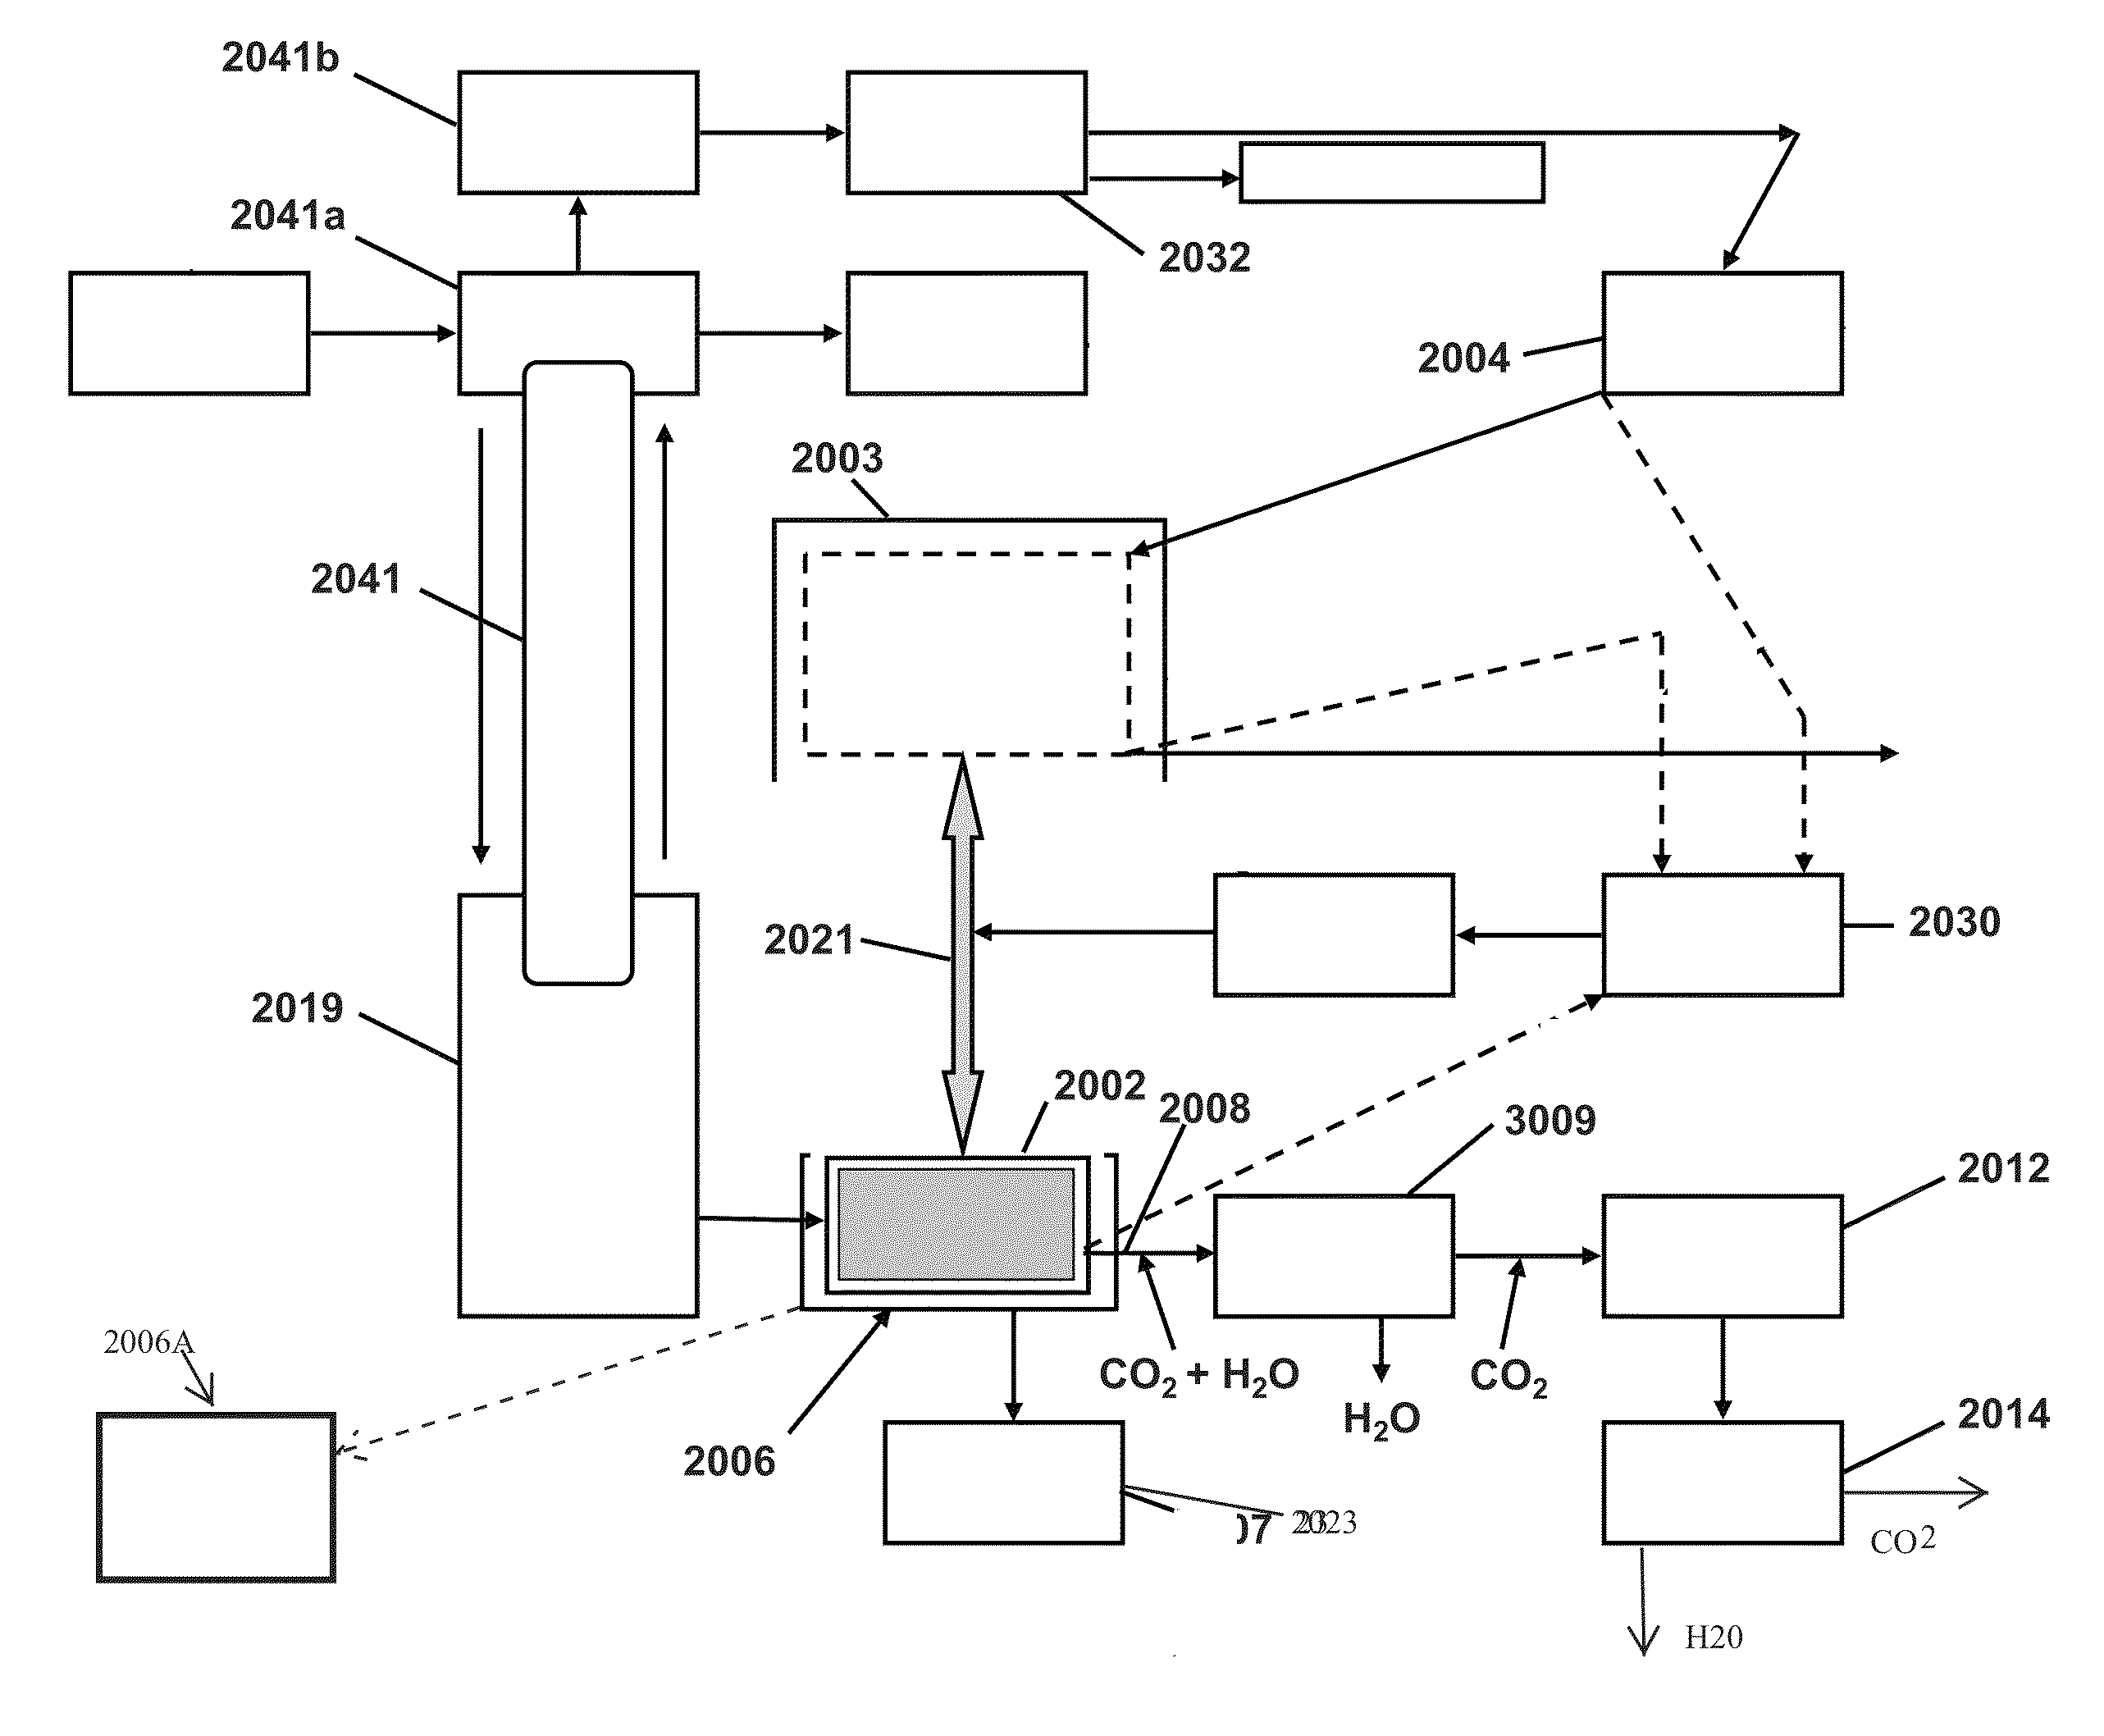 System and method for carbon dioxide capture and sequestration from relatively high concentration CO<sub>2 </sub>mixtures